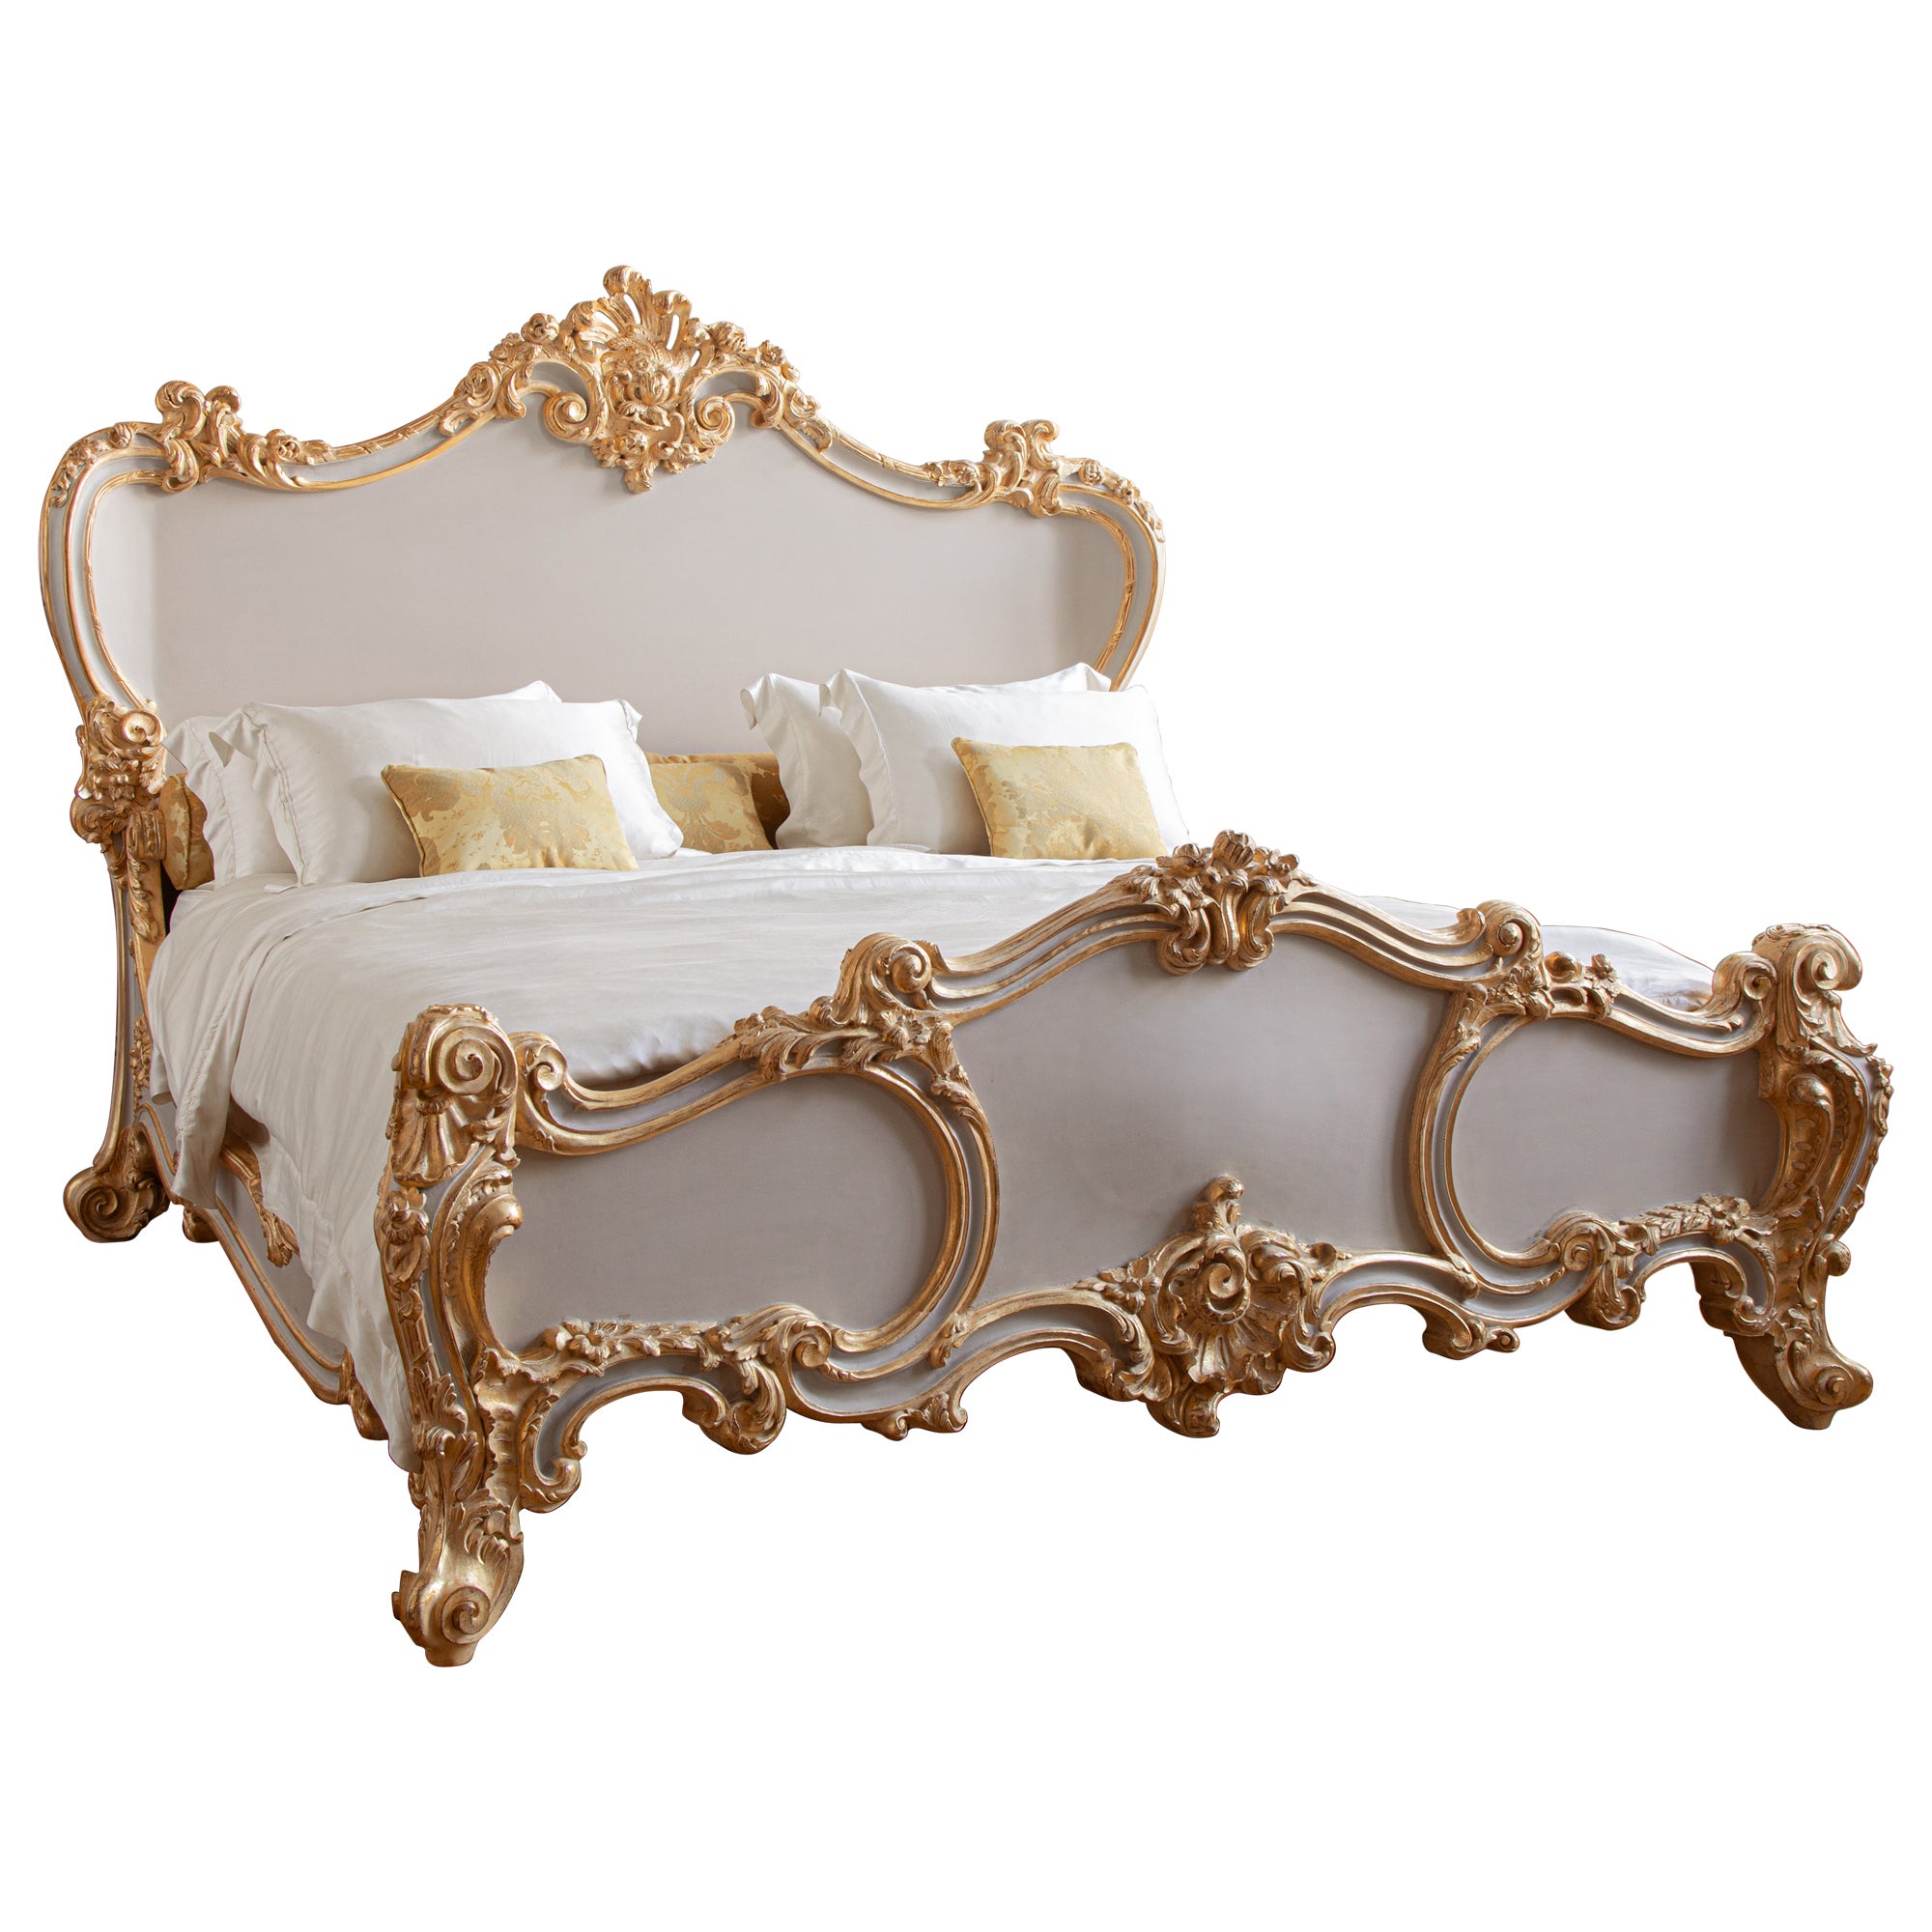 The Cherub Bed By La Maison London With Gold Highlights - UK Super King For Sale